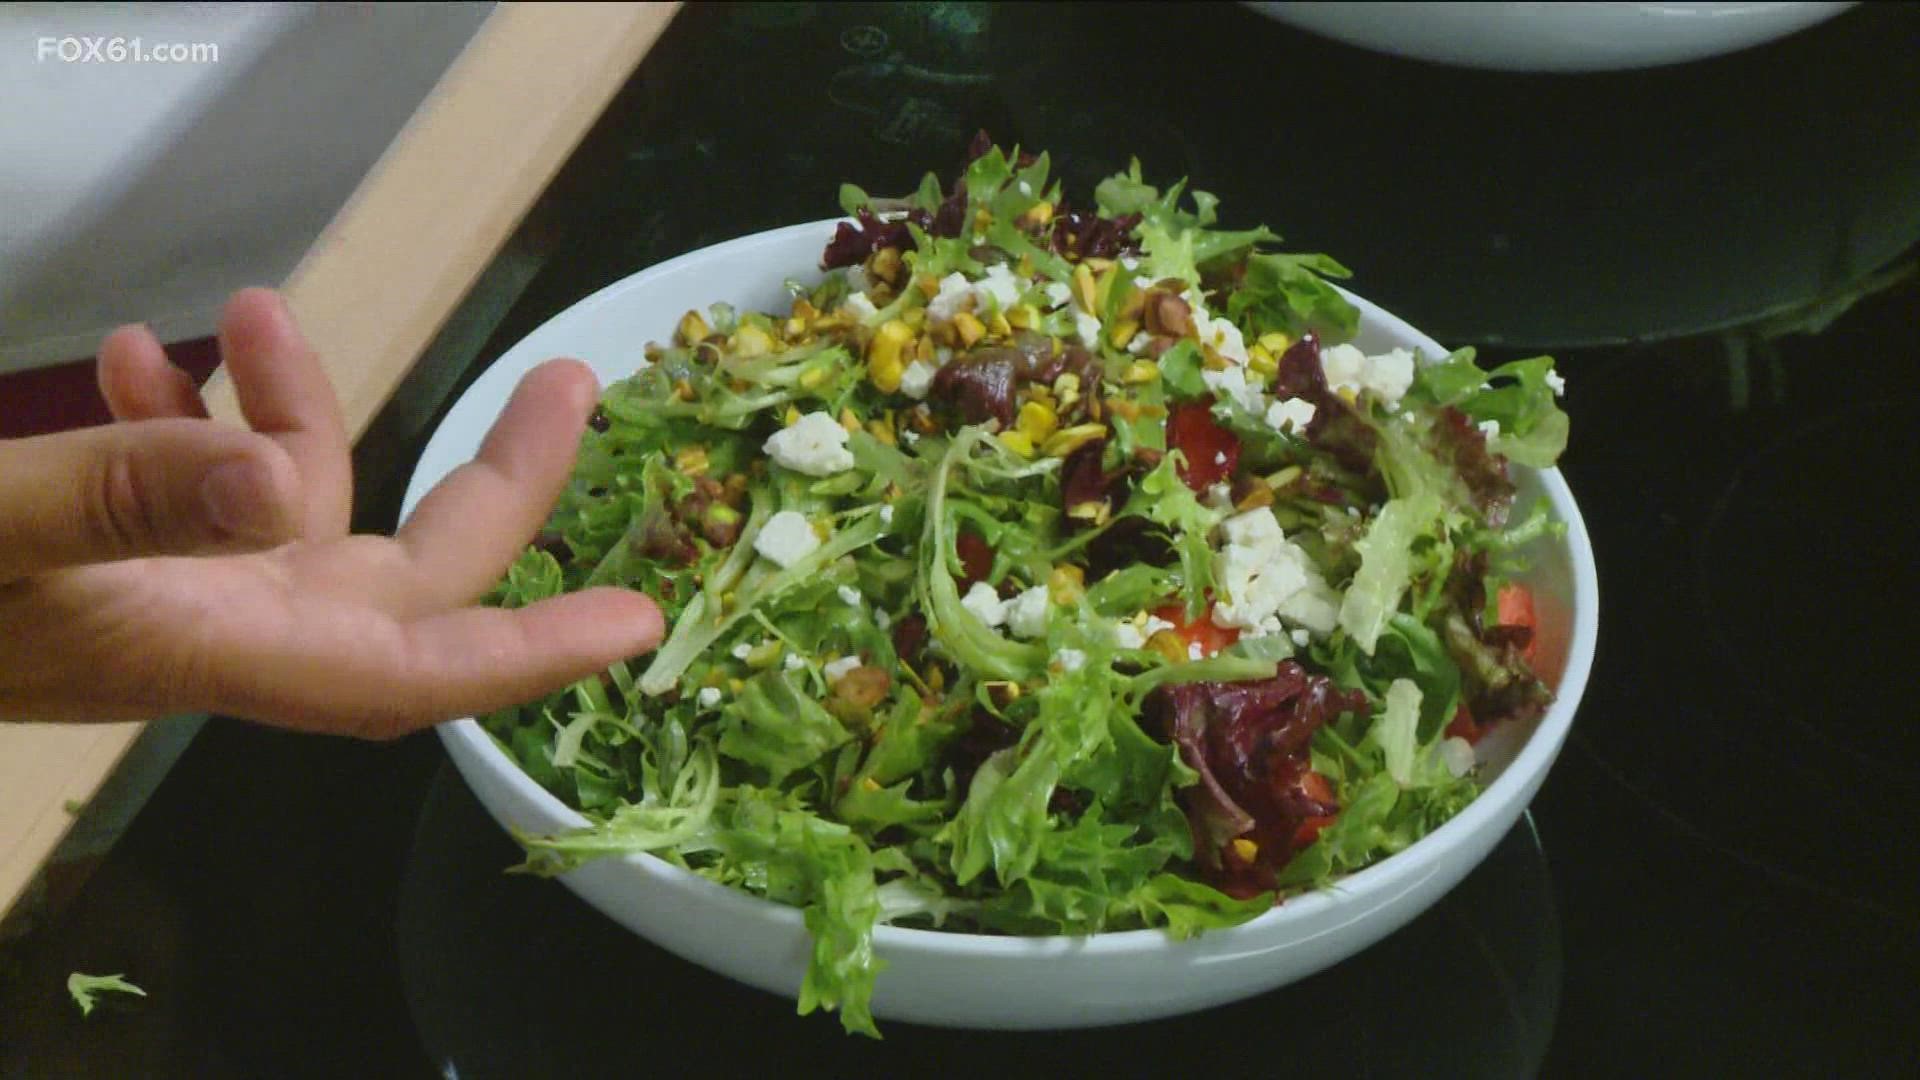 Learn how to make this fan-favorite, refreshing summer salad from California Pizza Kitchen!